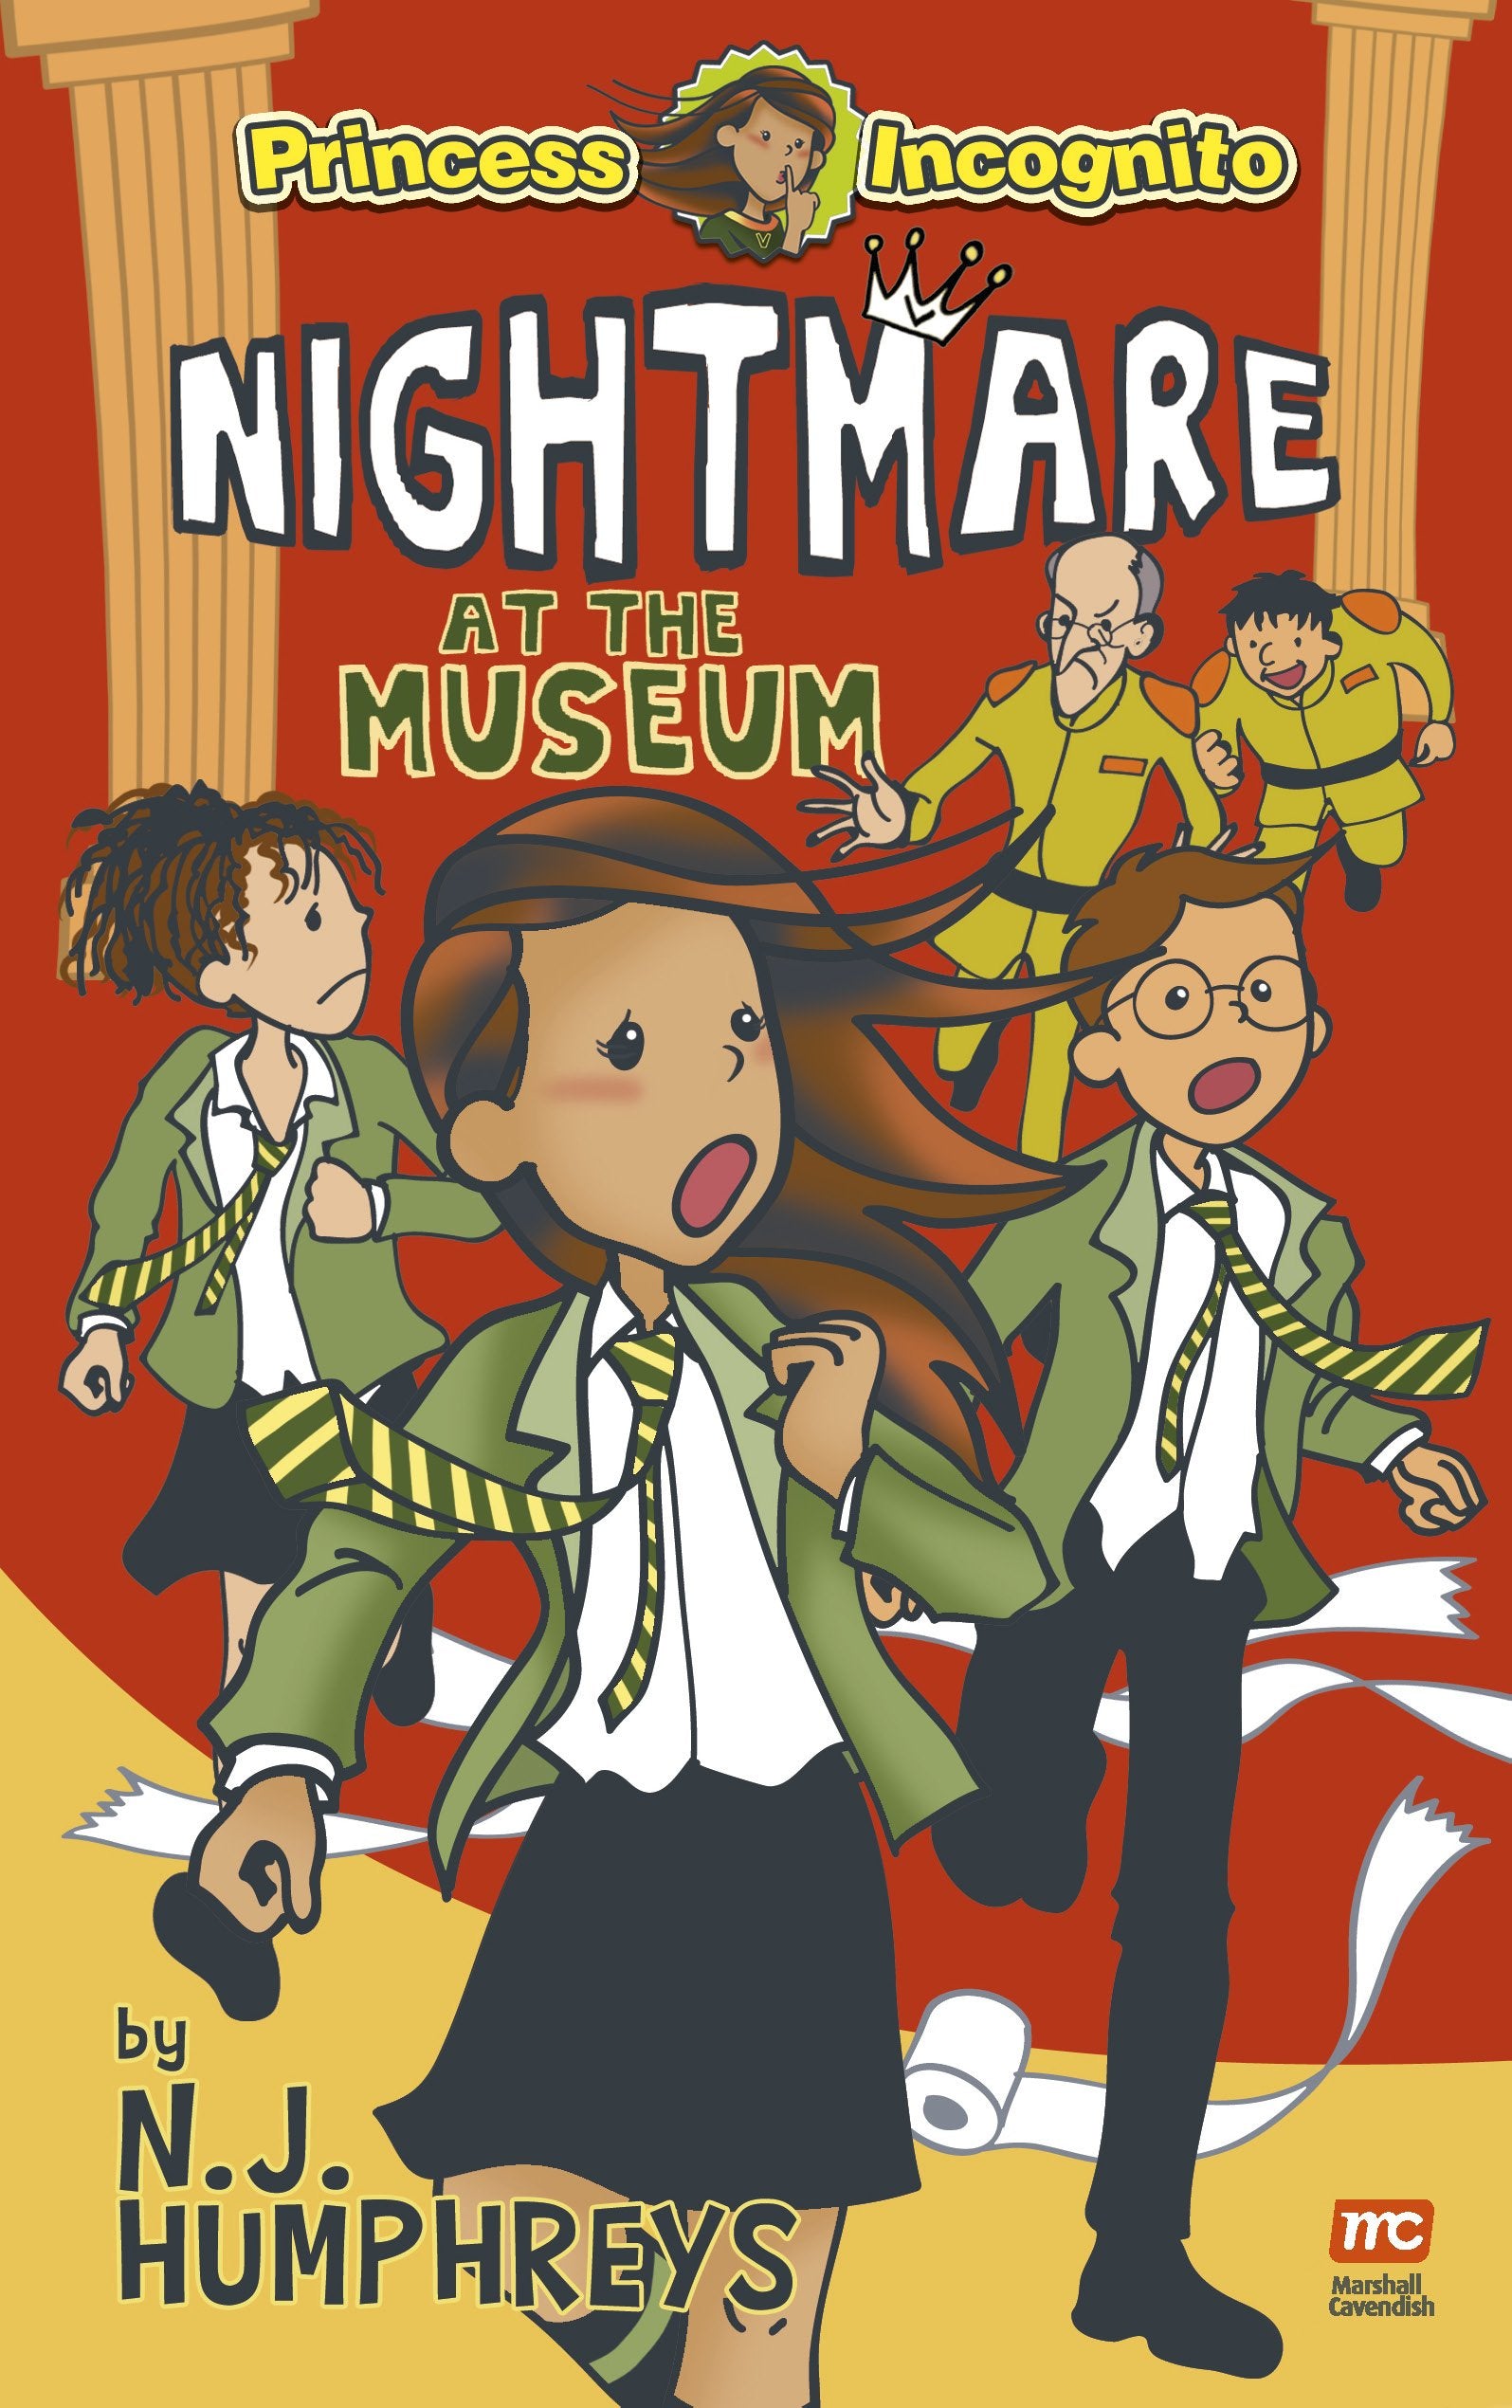 Princess Incognito: Nightmare at the Museum (book 2)